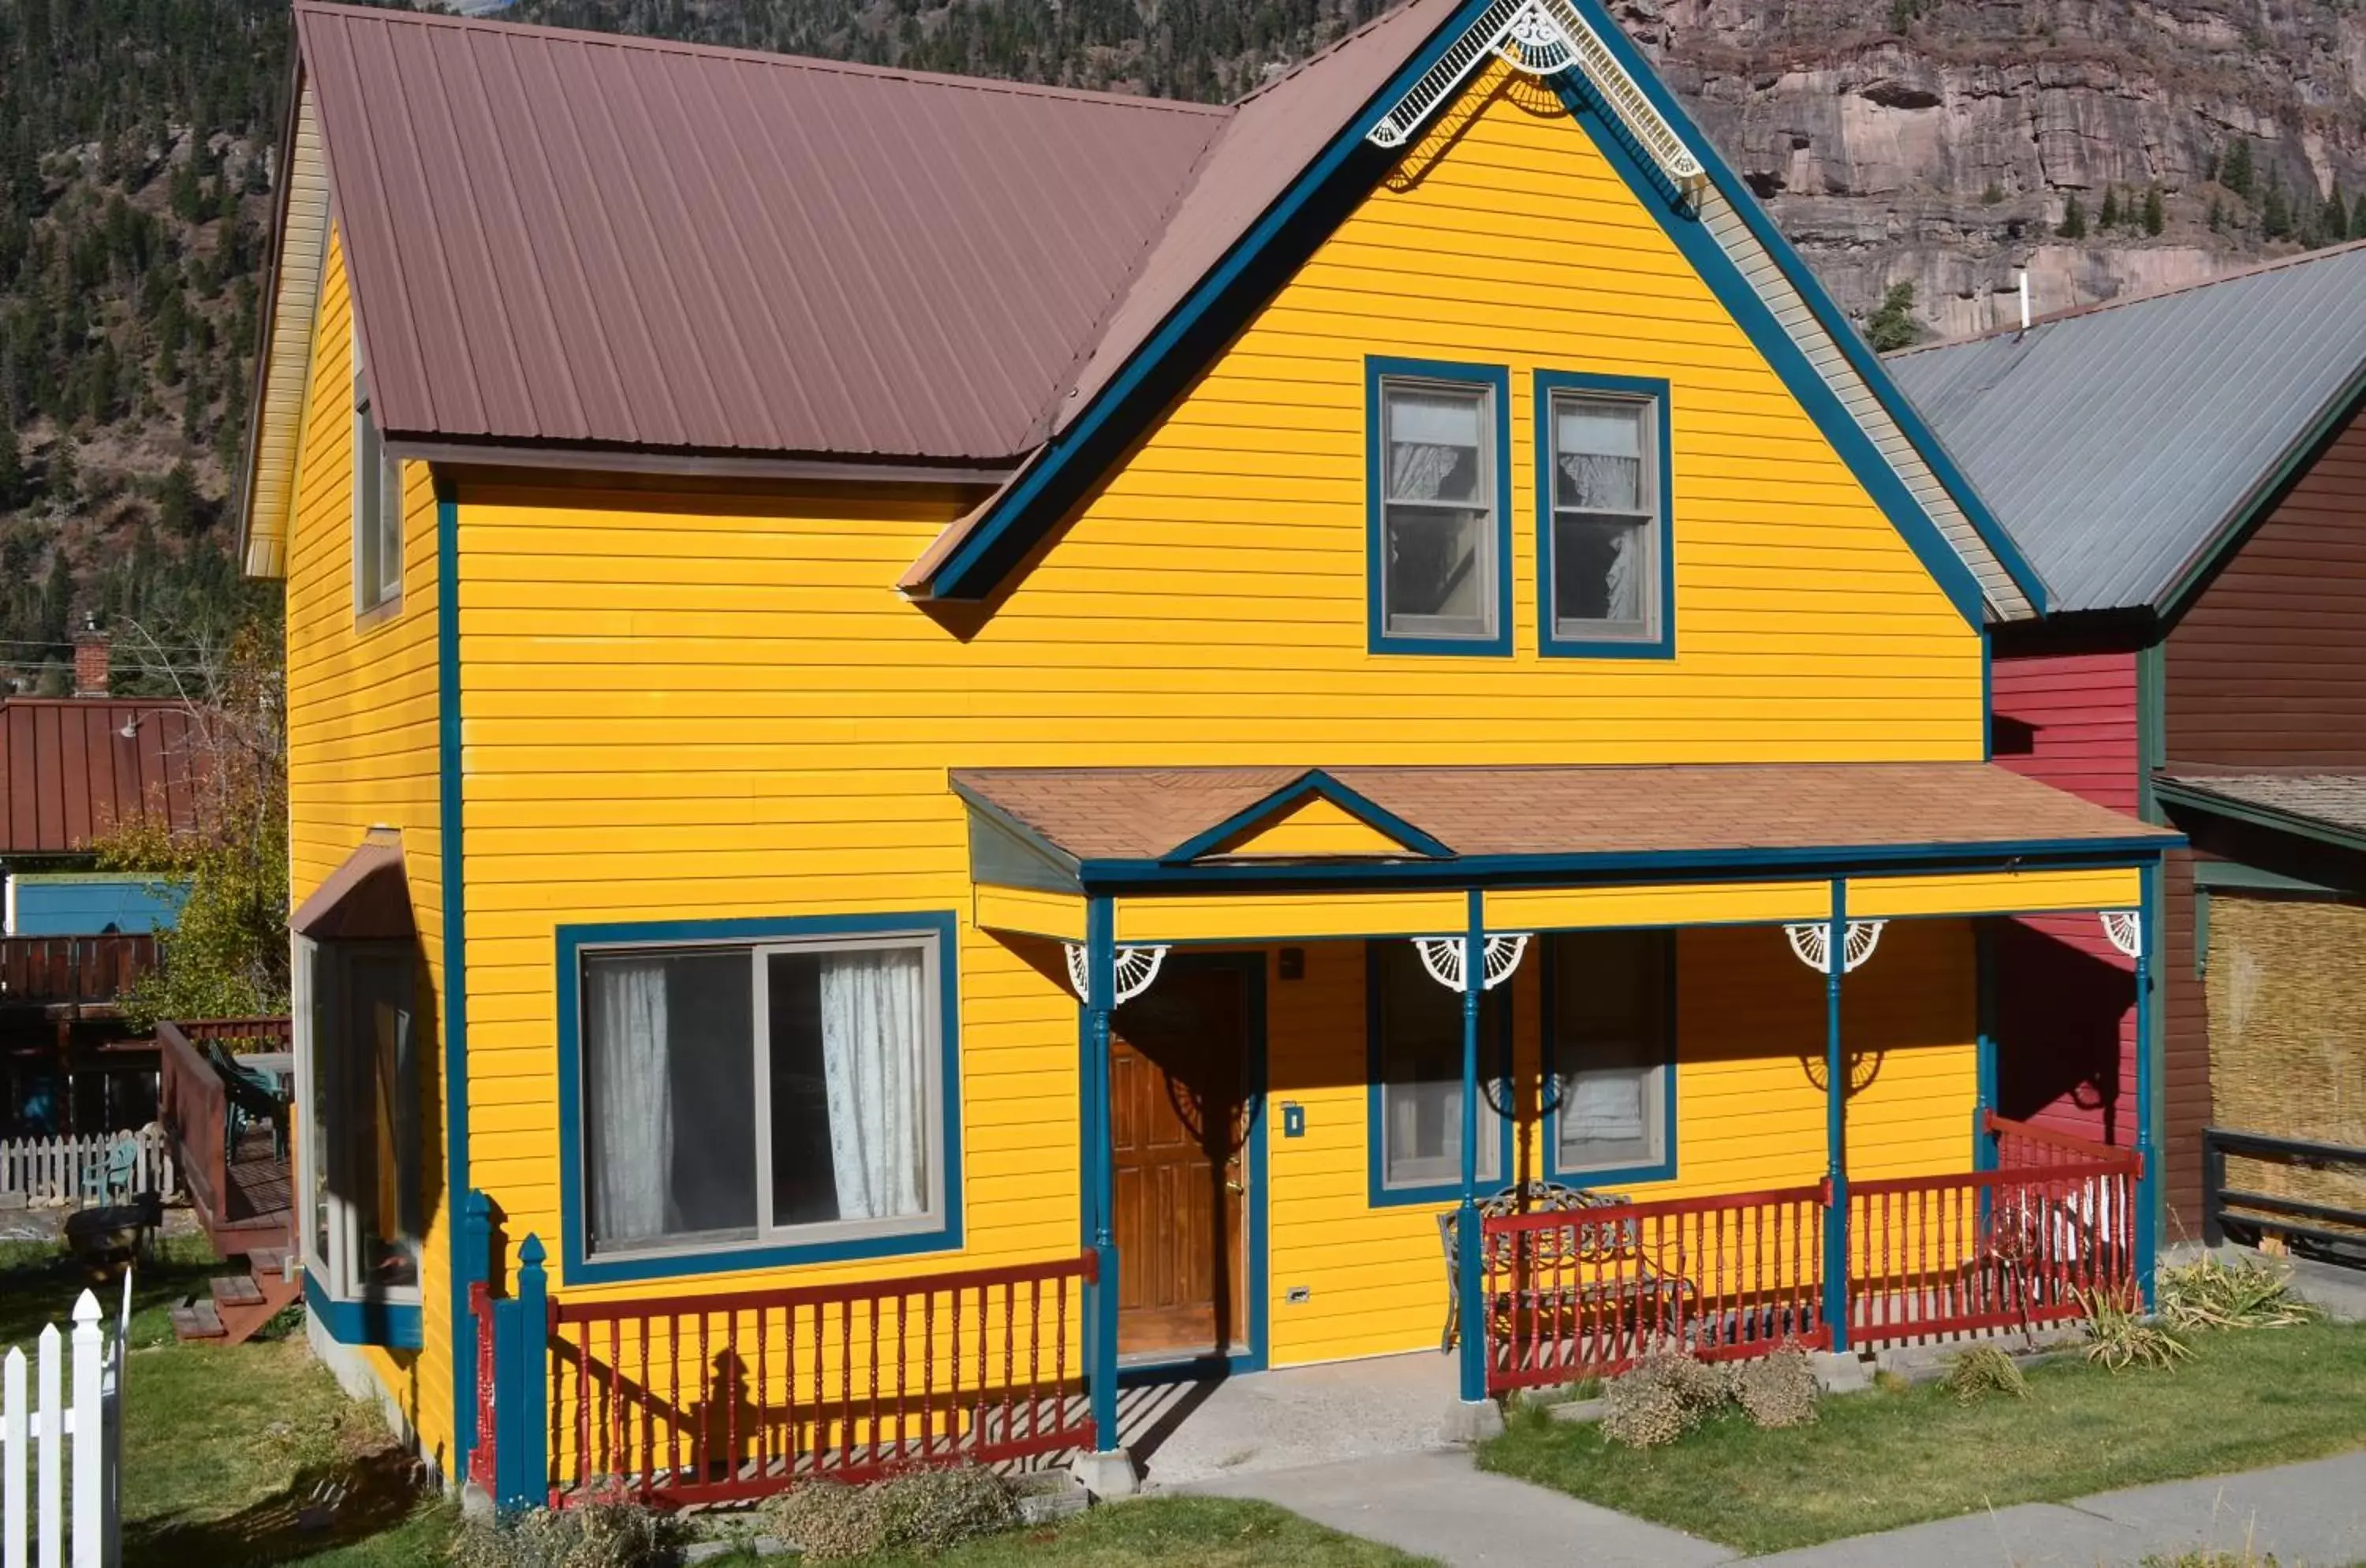 Property Building in The Ouray Main Street Inn